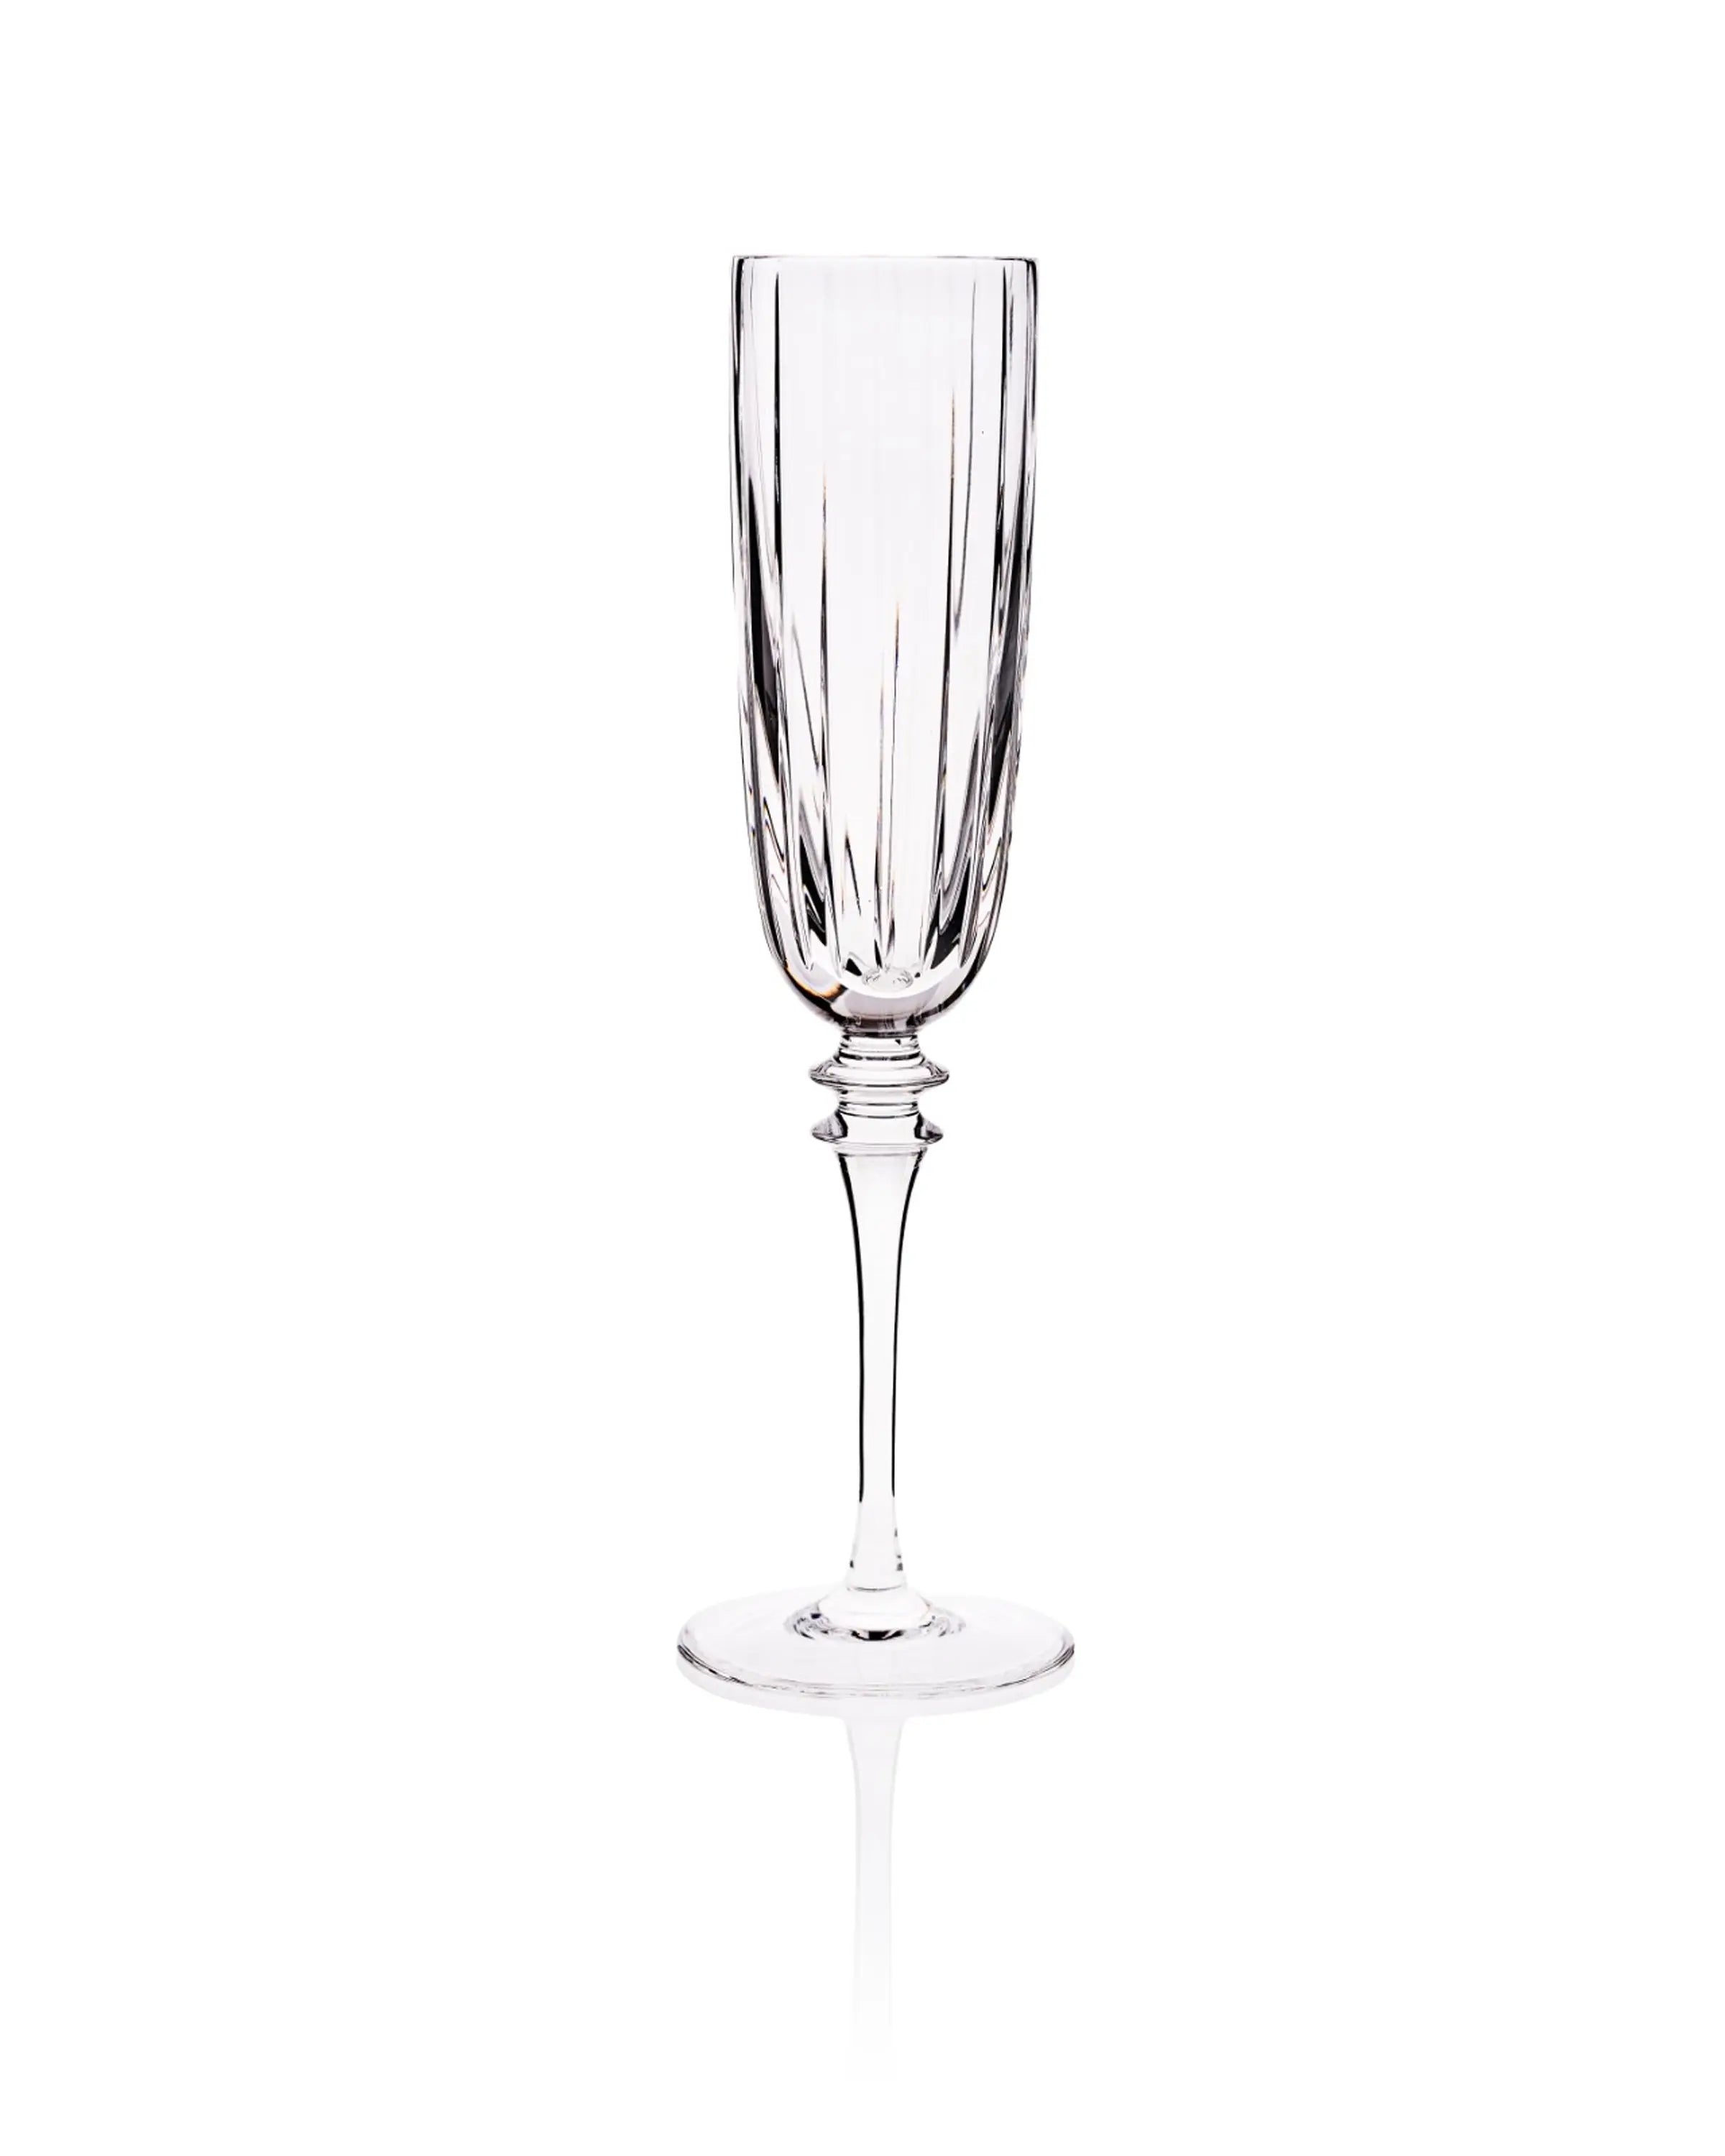 Exquisite Handmade Crystal Champagne Glass"